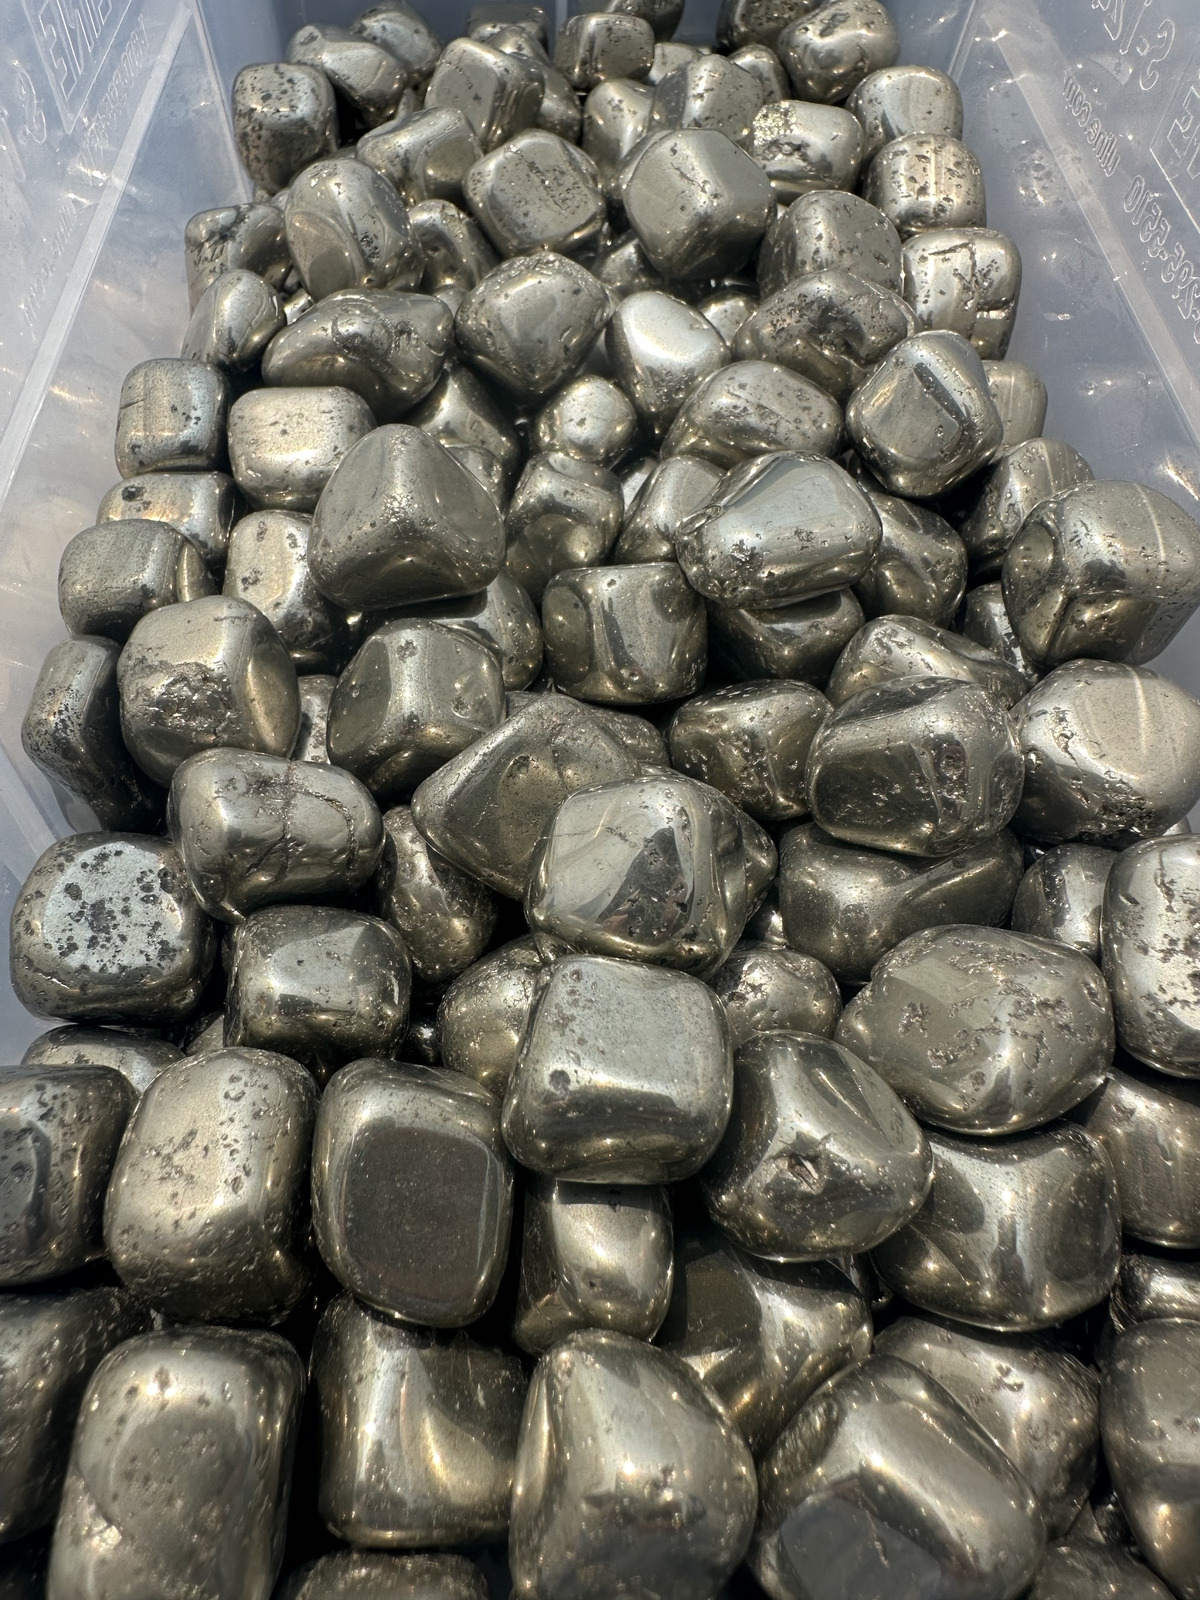 Pyrite Tumbled Stone, Polished Natural Pyrite Stone from Spain